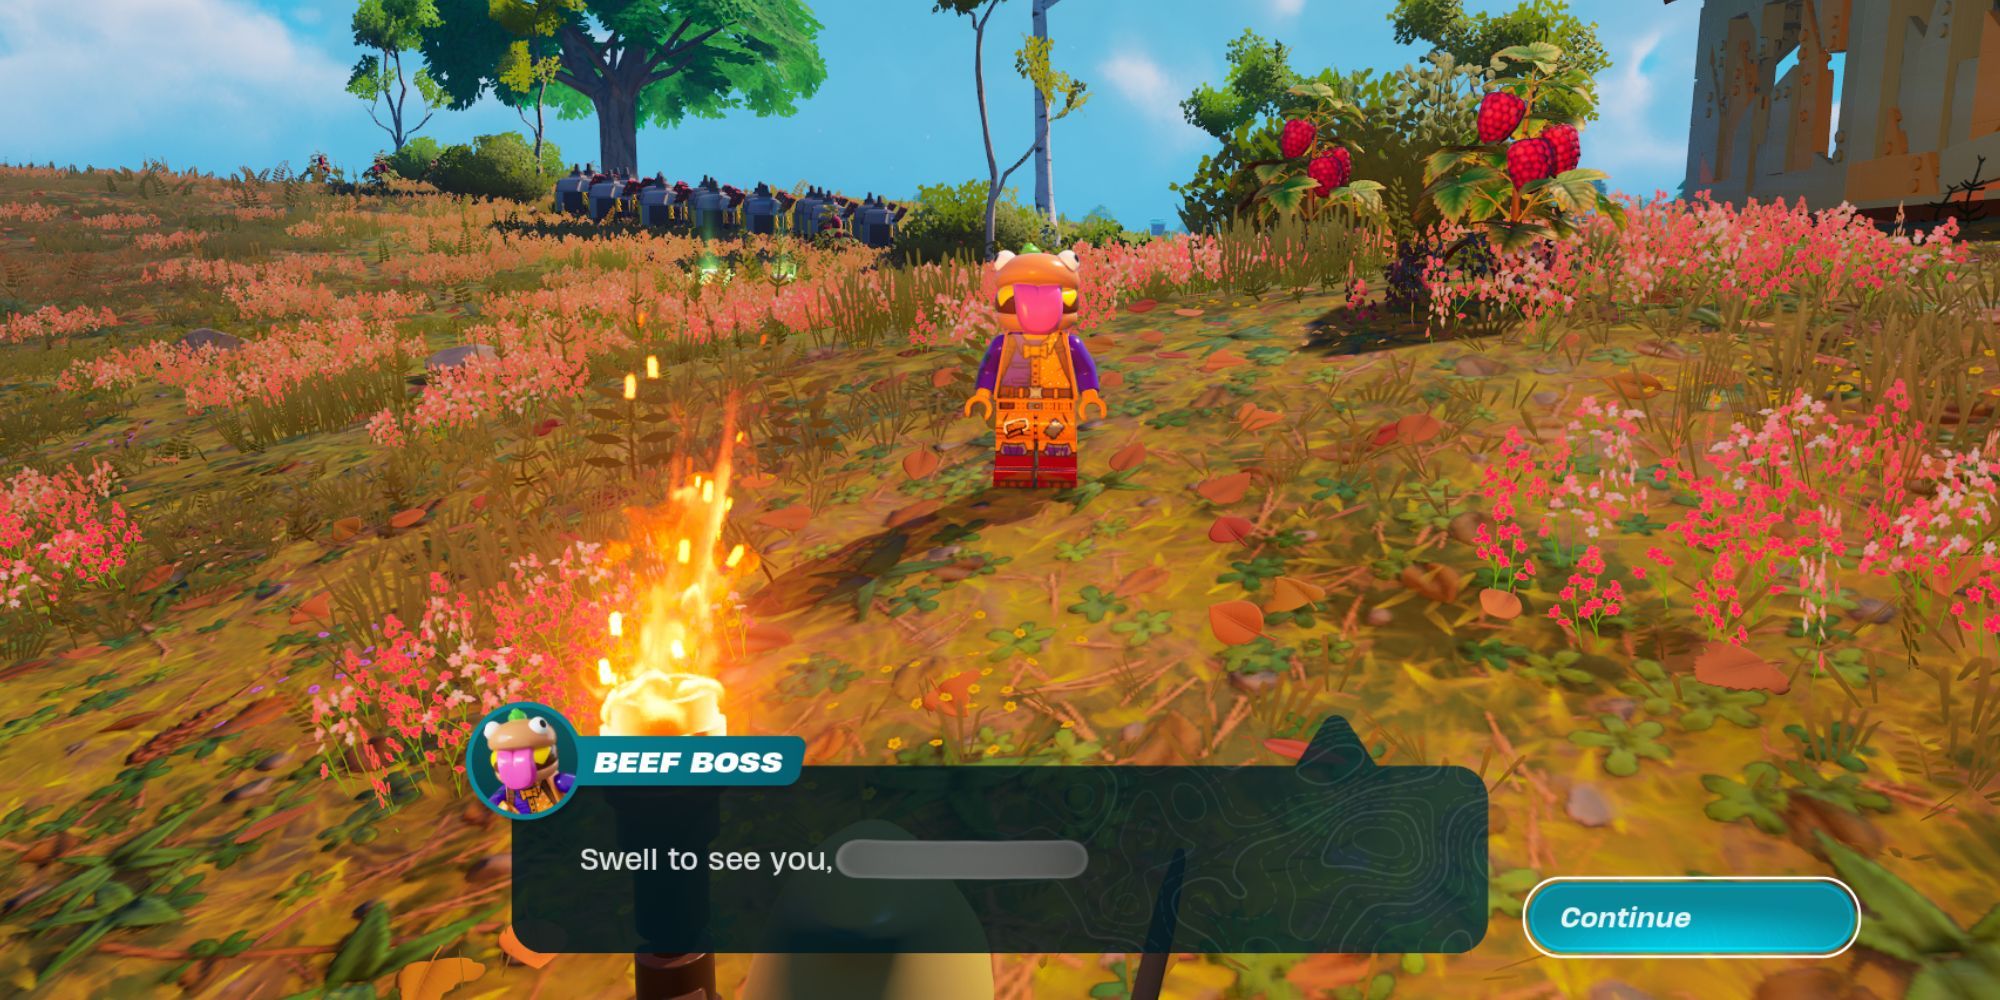 A dialogue with Beef Boss, a mostly purple and pink lego character with a hamburger for a head.